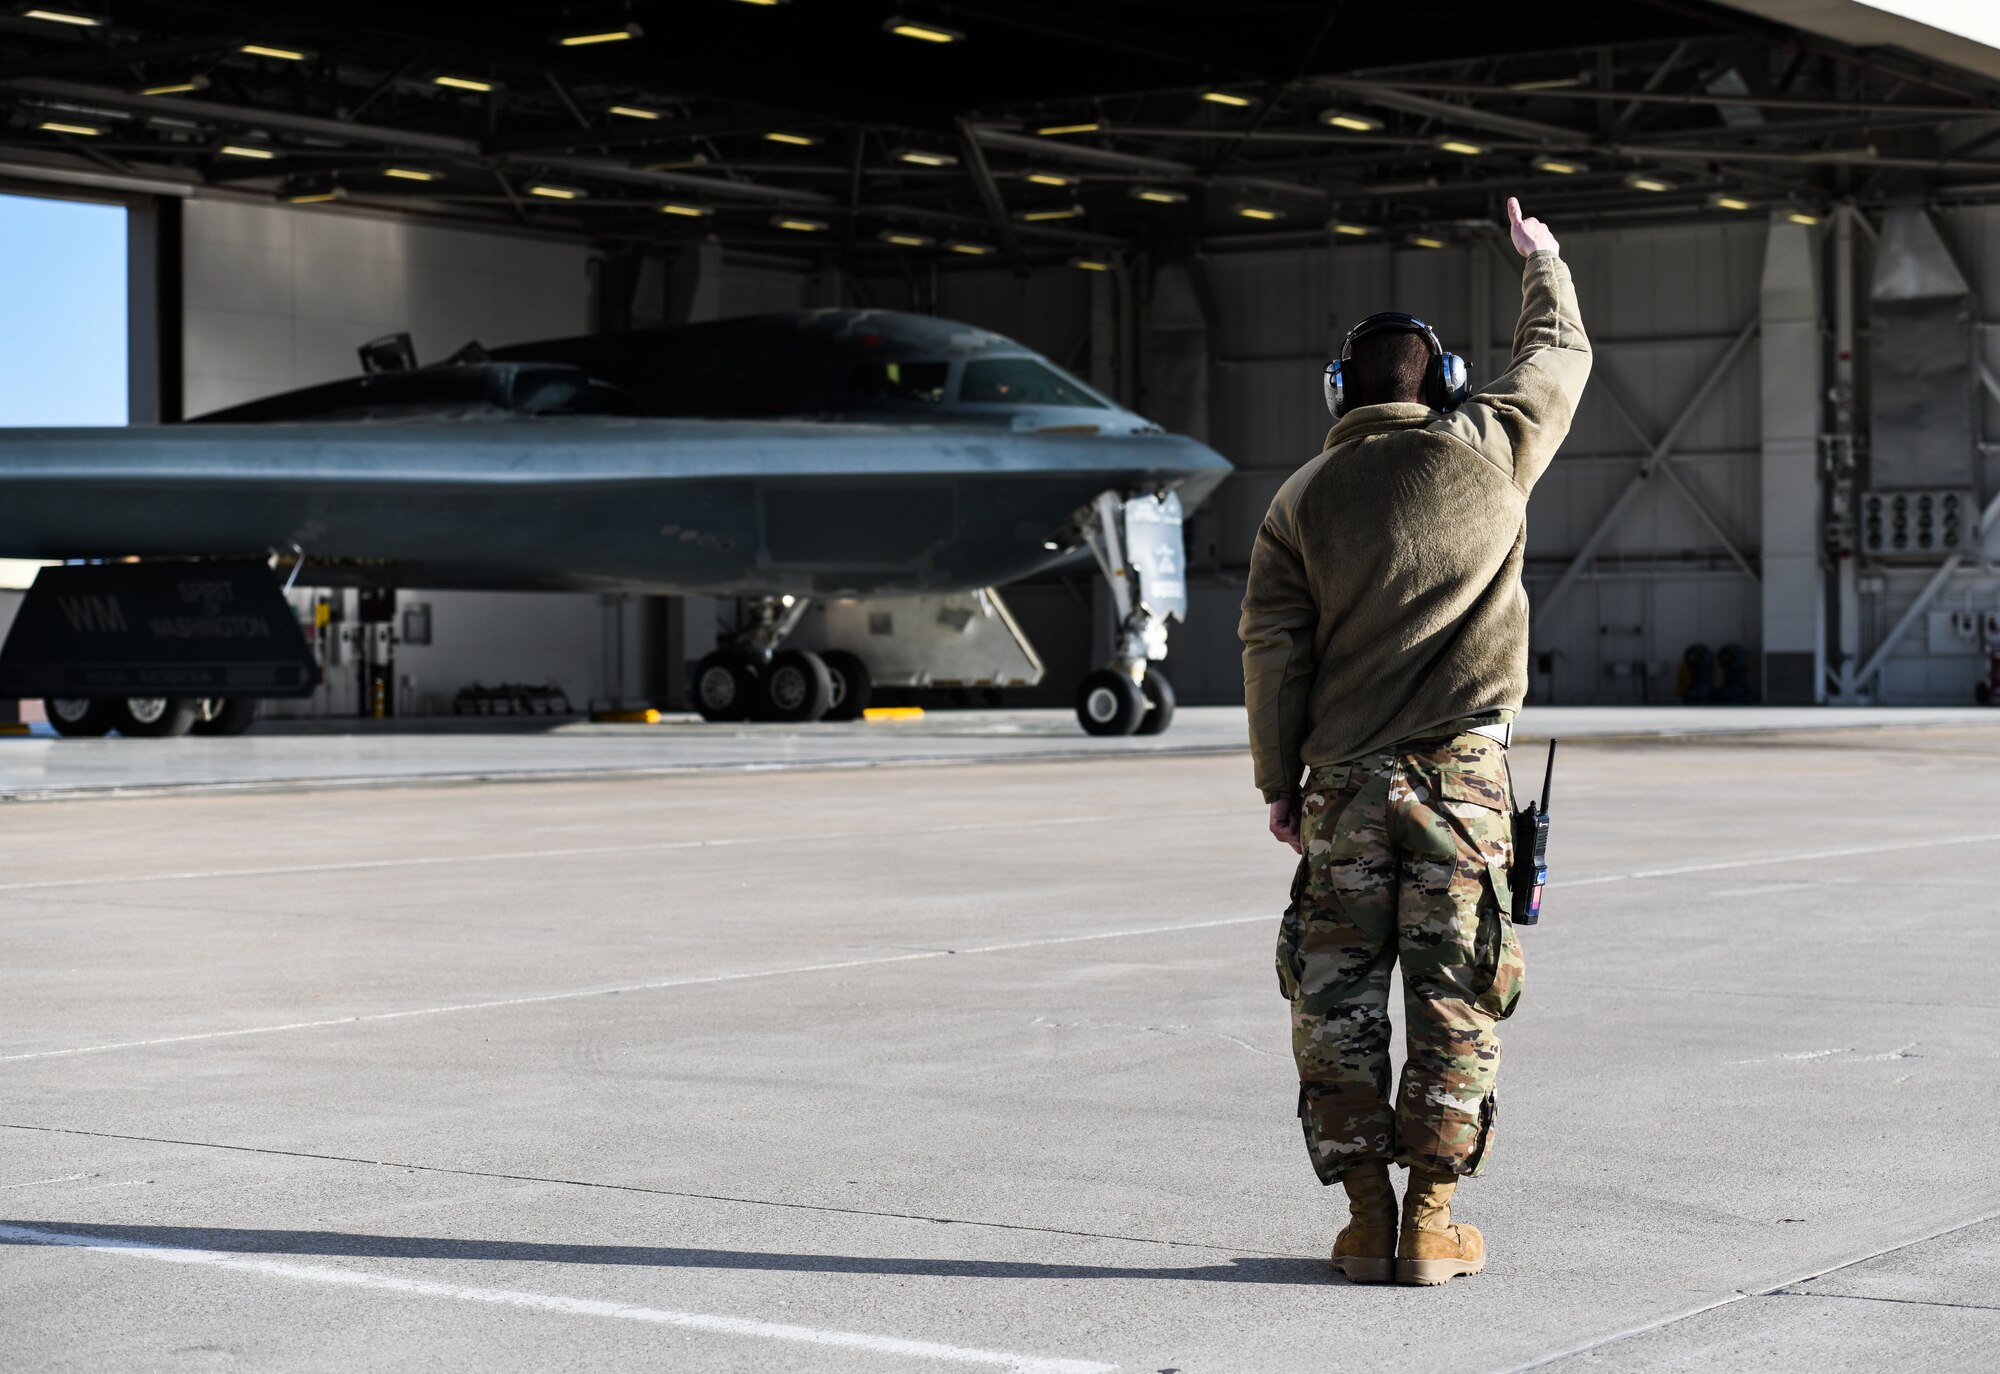 U.S. Air National Guard Tech. Sgt. Justin Aeckerle, a B-2 crew chief assigned to the 131st Maintenance Squadron, gives a thumbs-up hand signal to a B-2 Spirit pilot before takeoff at Whiteman Air Force Base, Missouri, March 8, 2020. The B-2 took off from Whiteman AFB to support U.S. Strategic Command Bomber Task Force operations in Europe. The 131s Bomb Wing’s 131st MXS is the total-force partner unit to the 509th Bomb Wing. (U.S. Air Force photo by Tech. Sgt. Alexander W. Riedel)